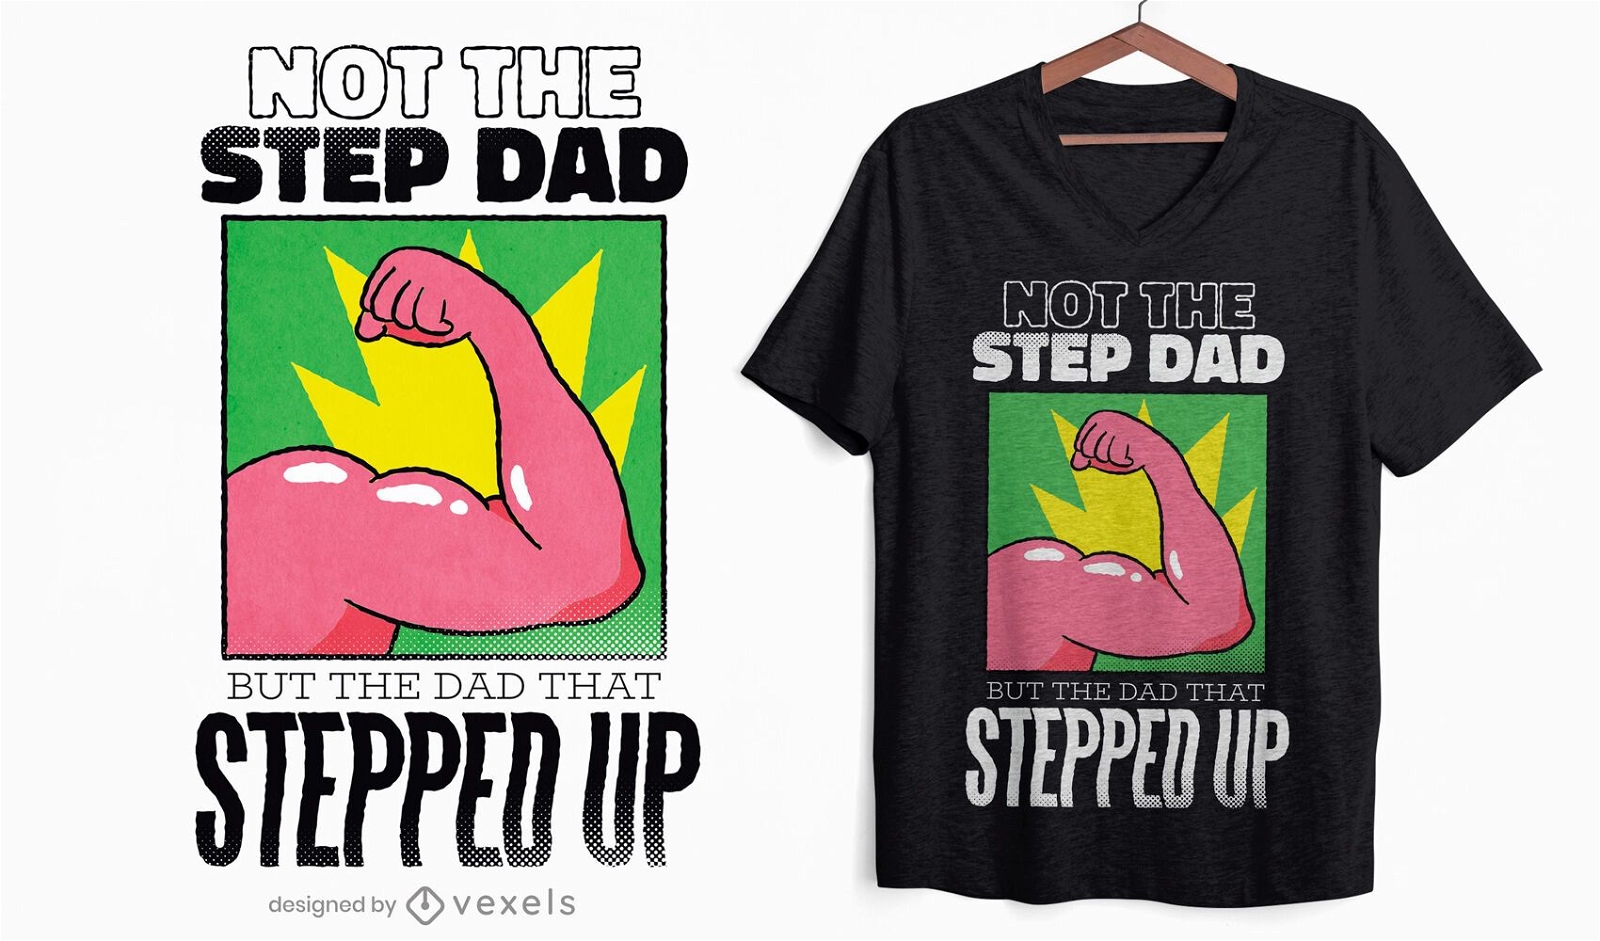 Step dad family quote t-shirt design